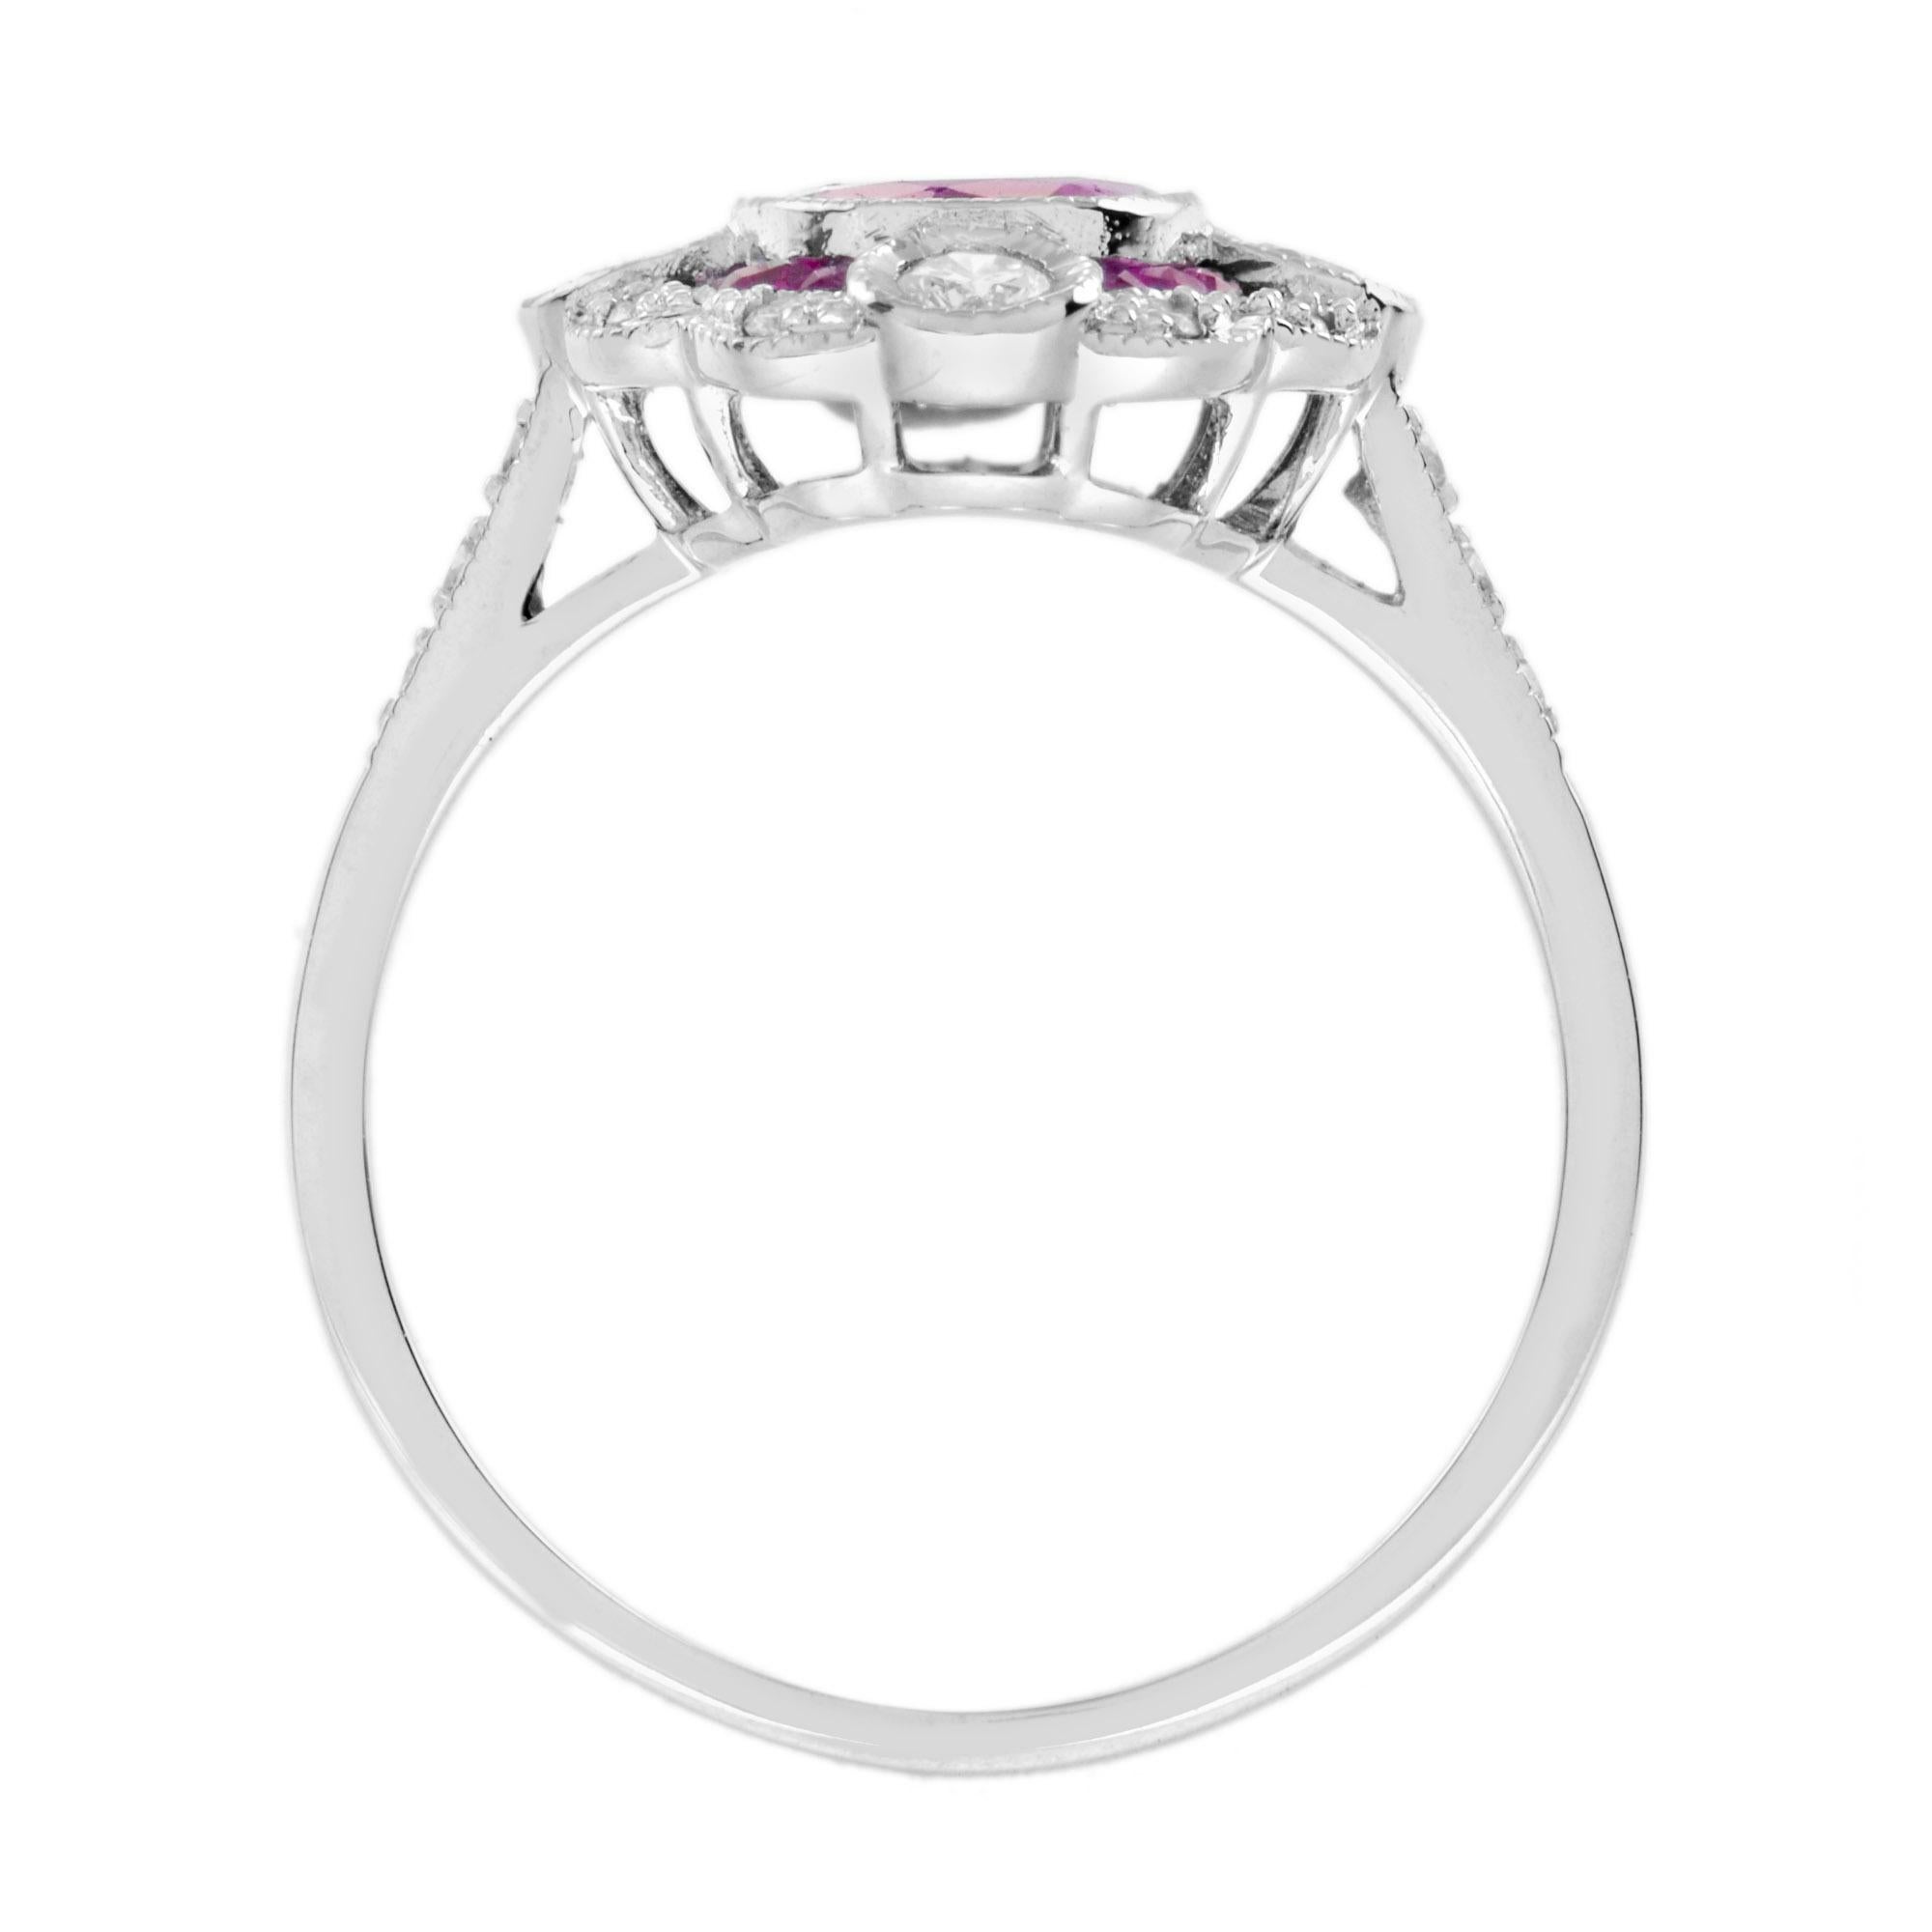 Pink Tourmaline Ruby Diamond Art Deco Style Engagement Ring in 18K White Gold For Sale 1